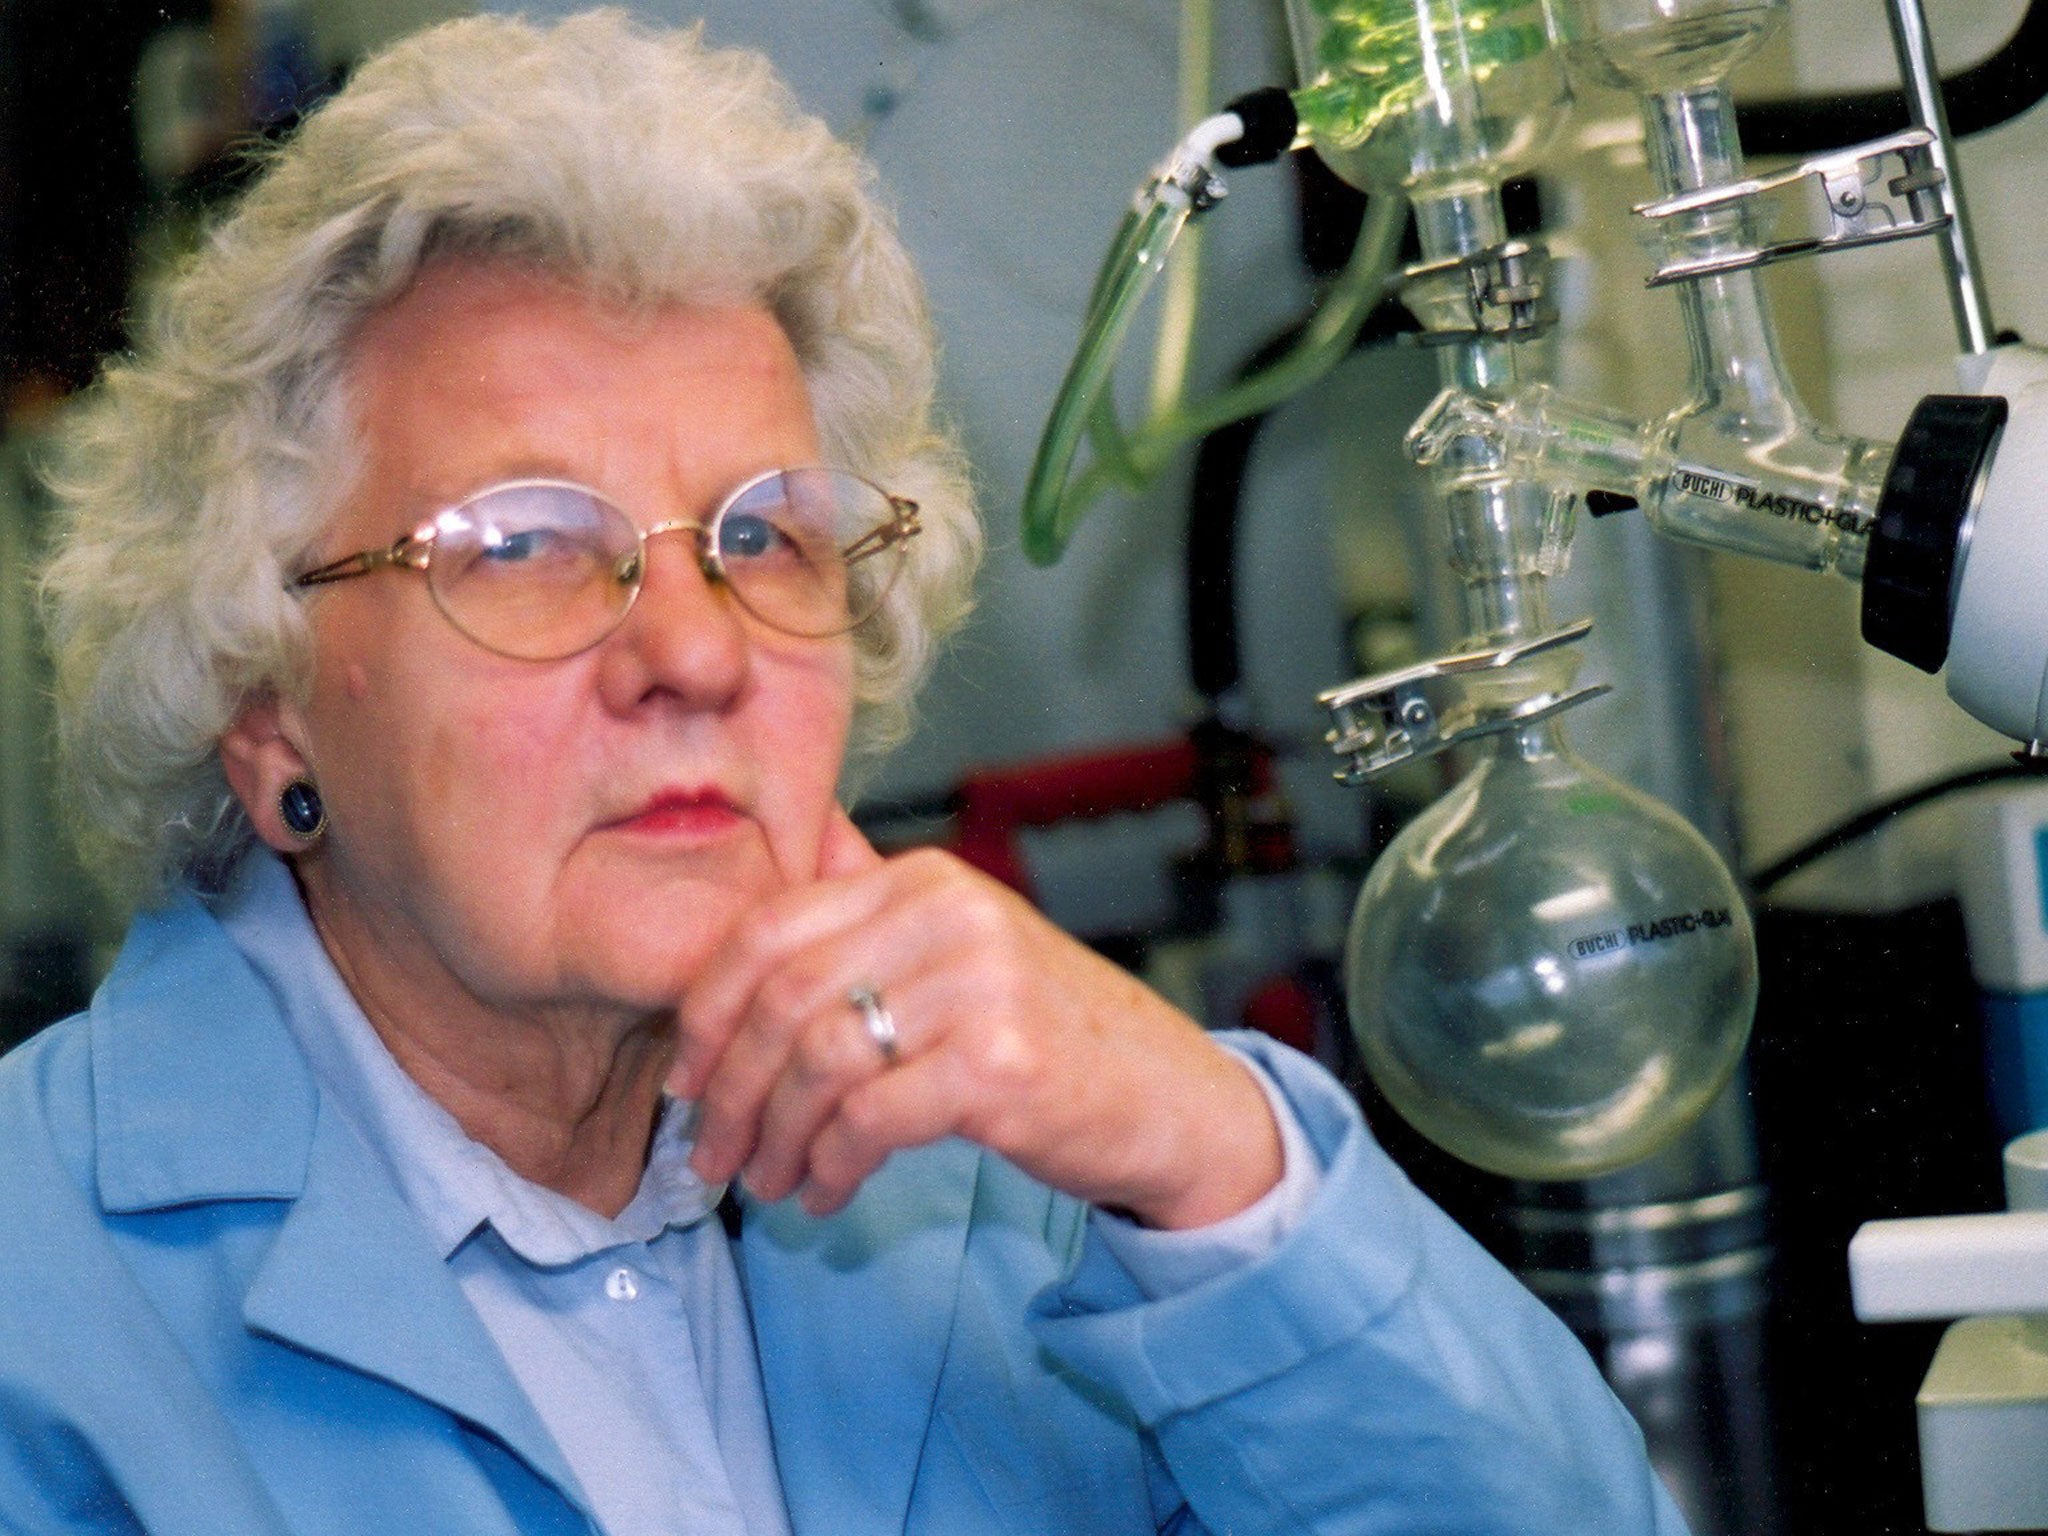 Ruth Benerito was a US Agriculture Department chemist